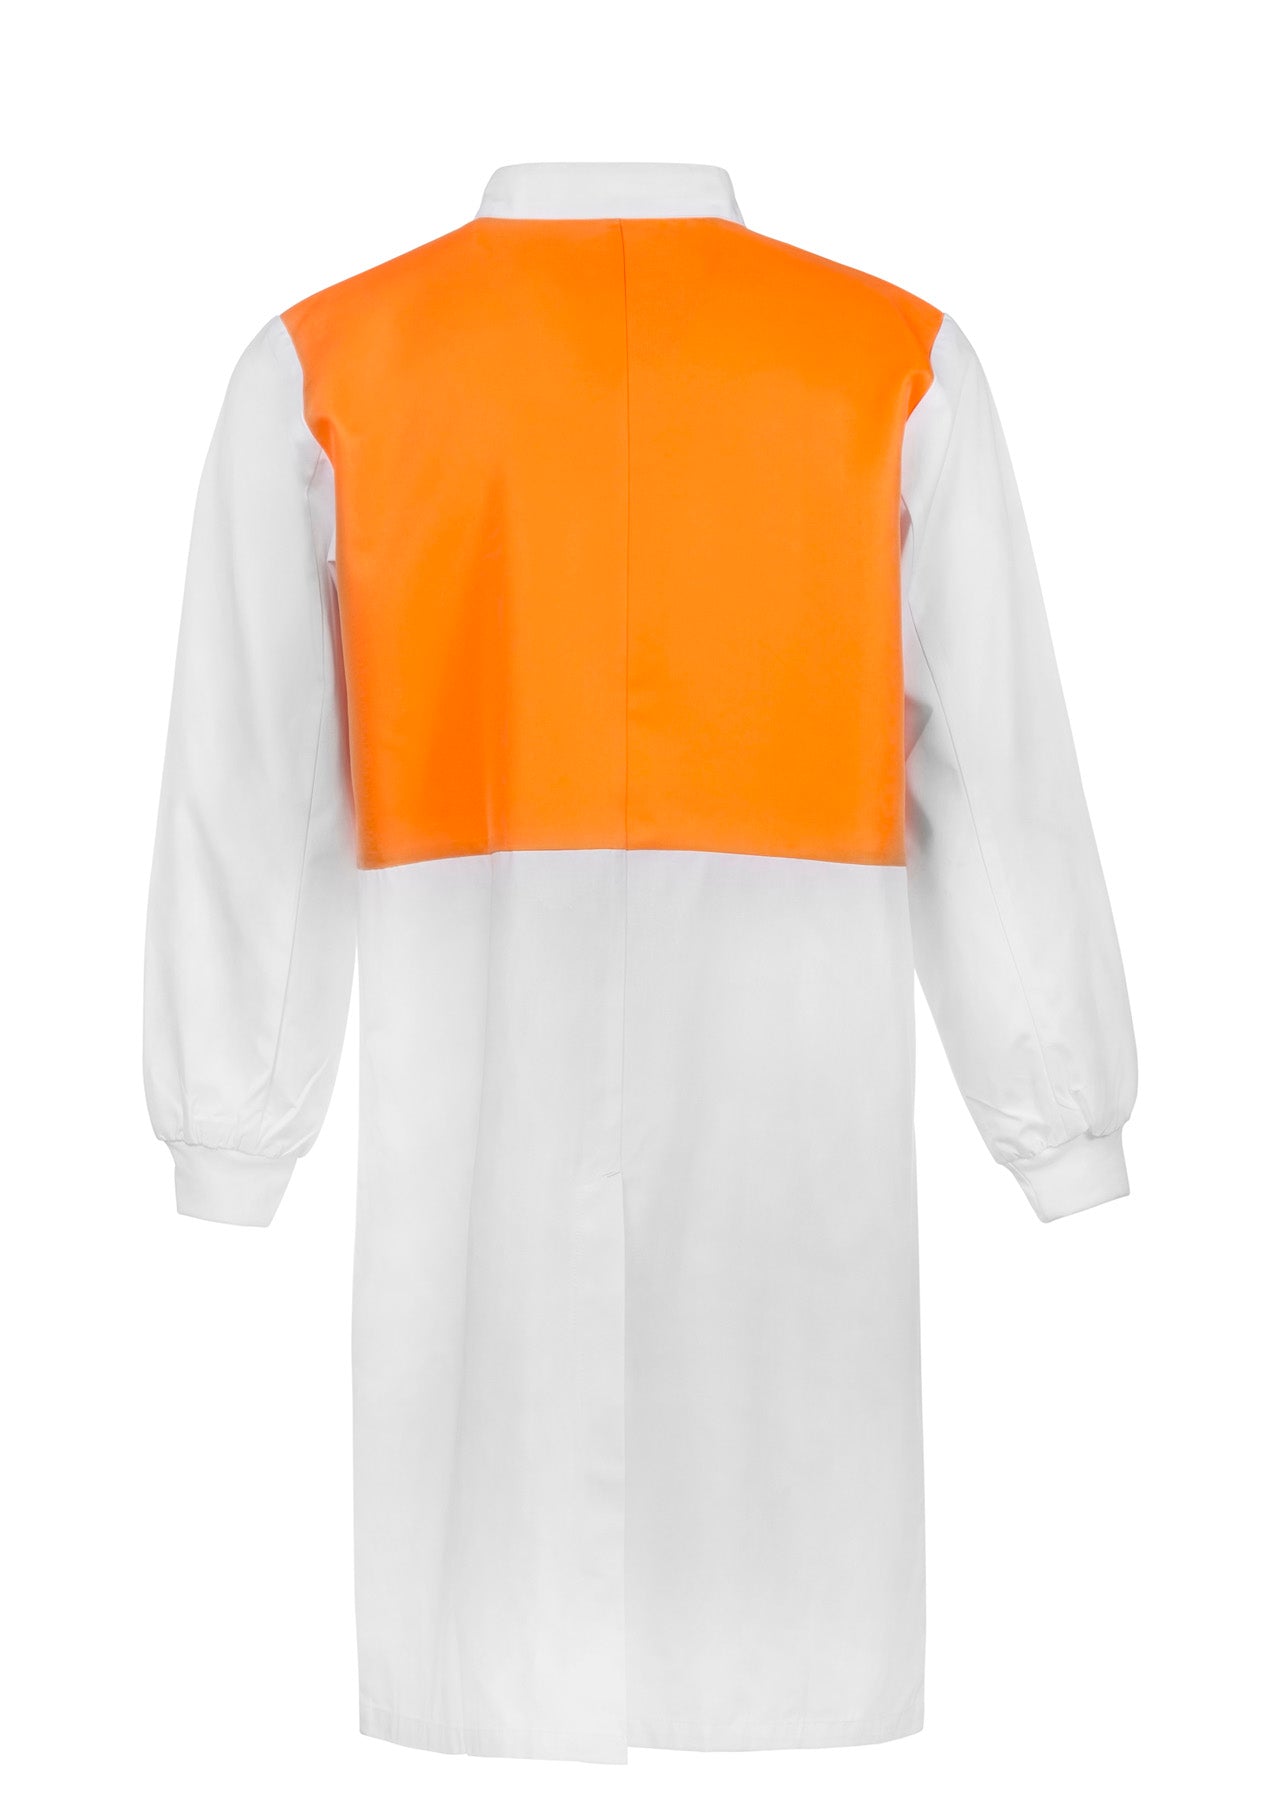 Orange White Long Length Food Industry Dustcoat - made by Workcraft